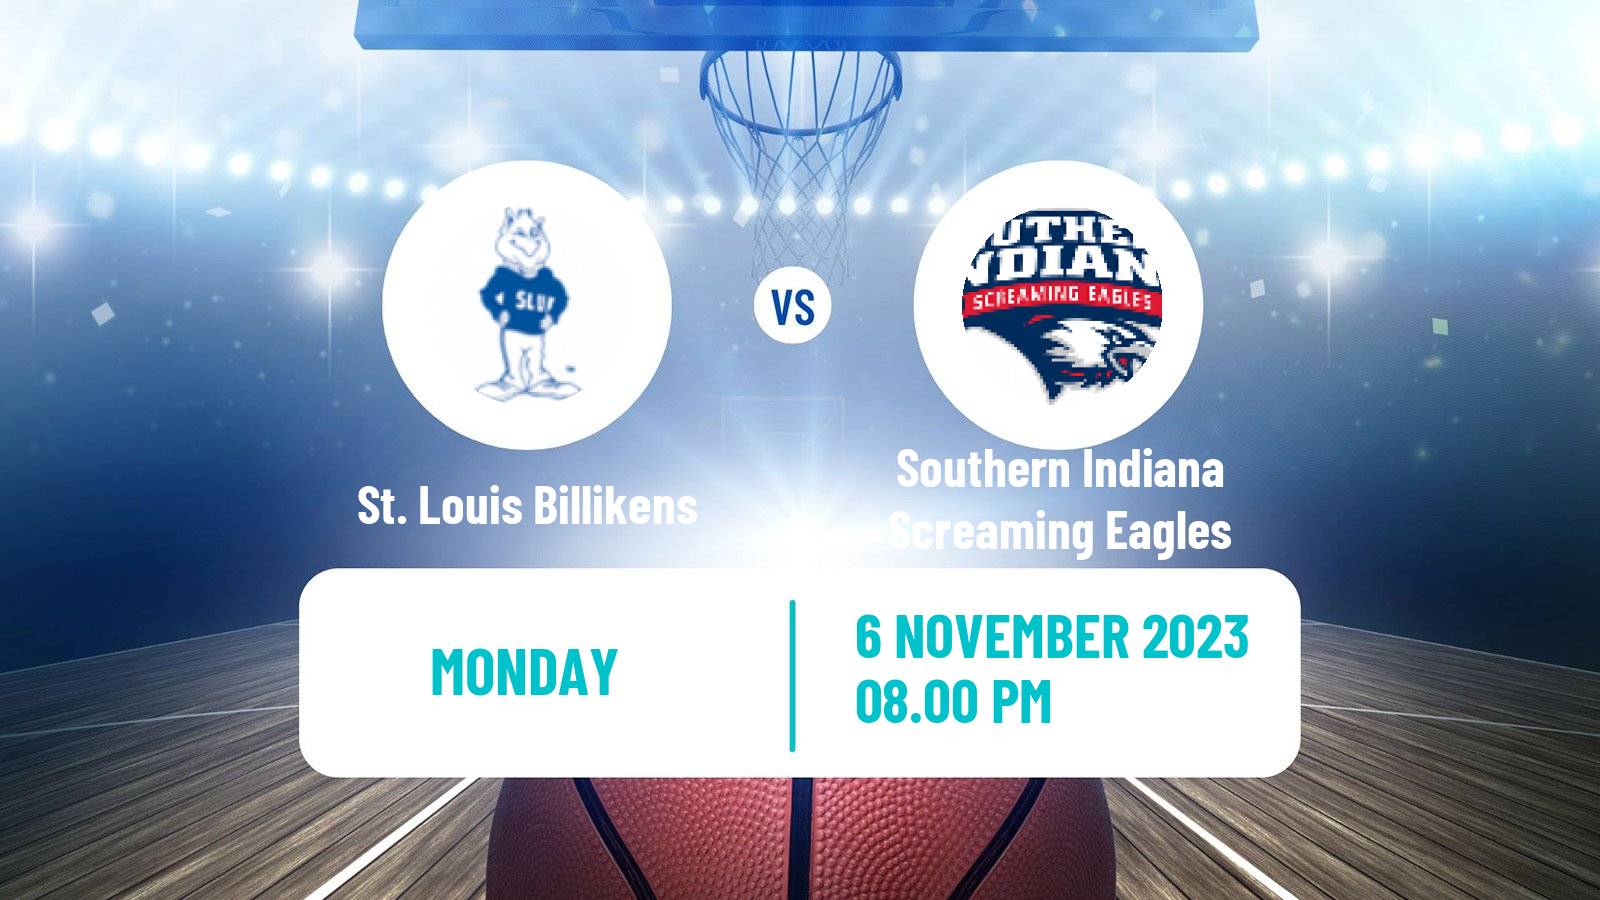 Basketball NCAA College Basketball St. Louis Billikens - Southern Indiana Screaming Eagles